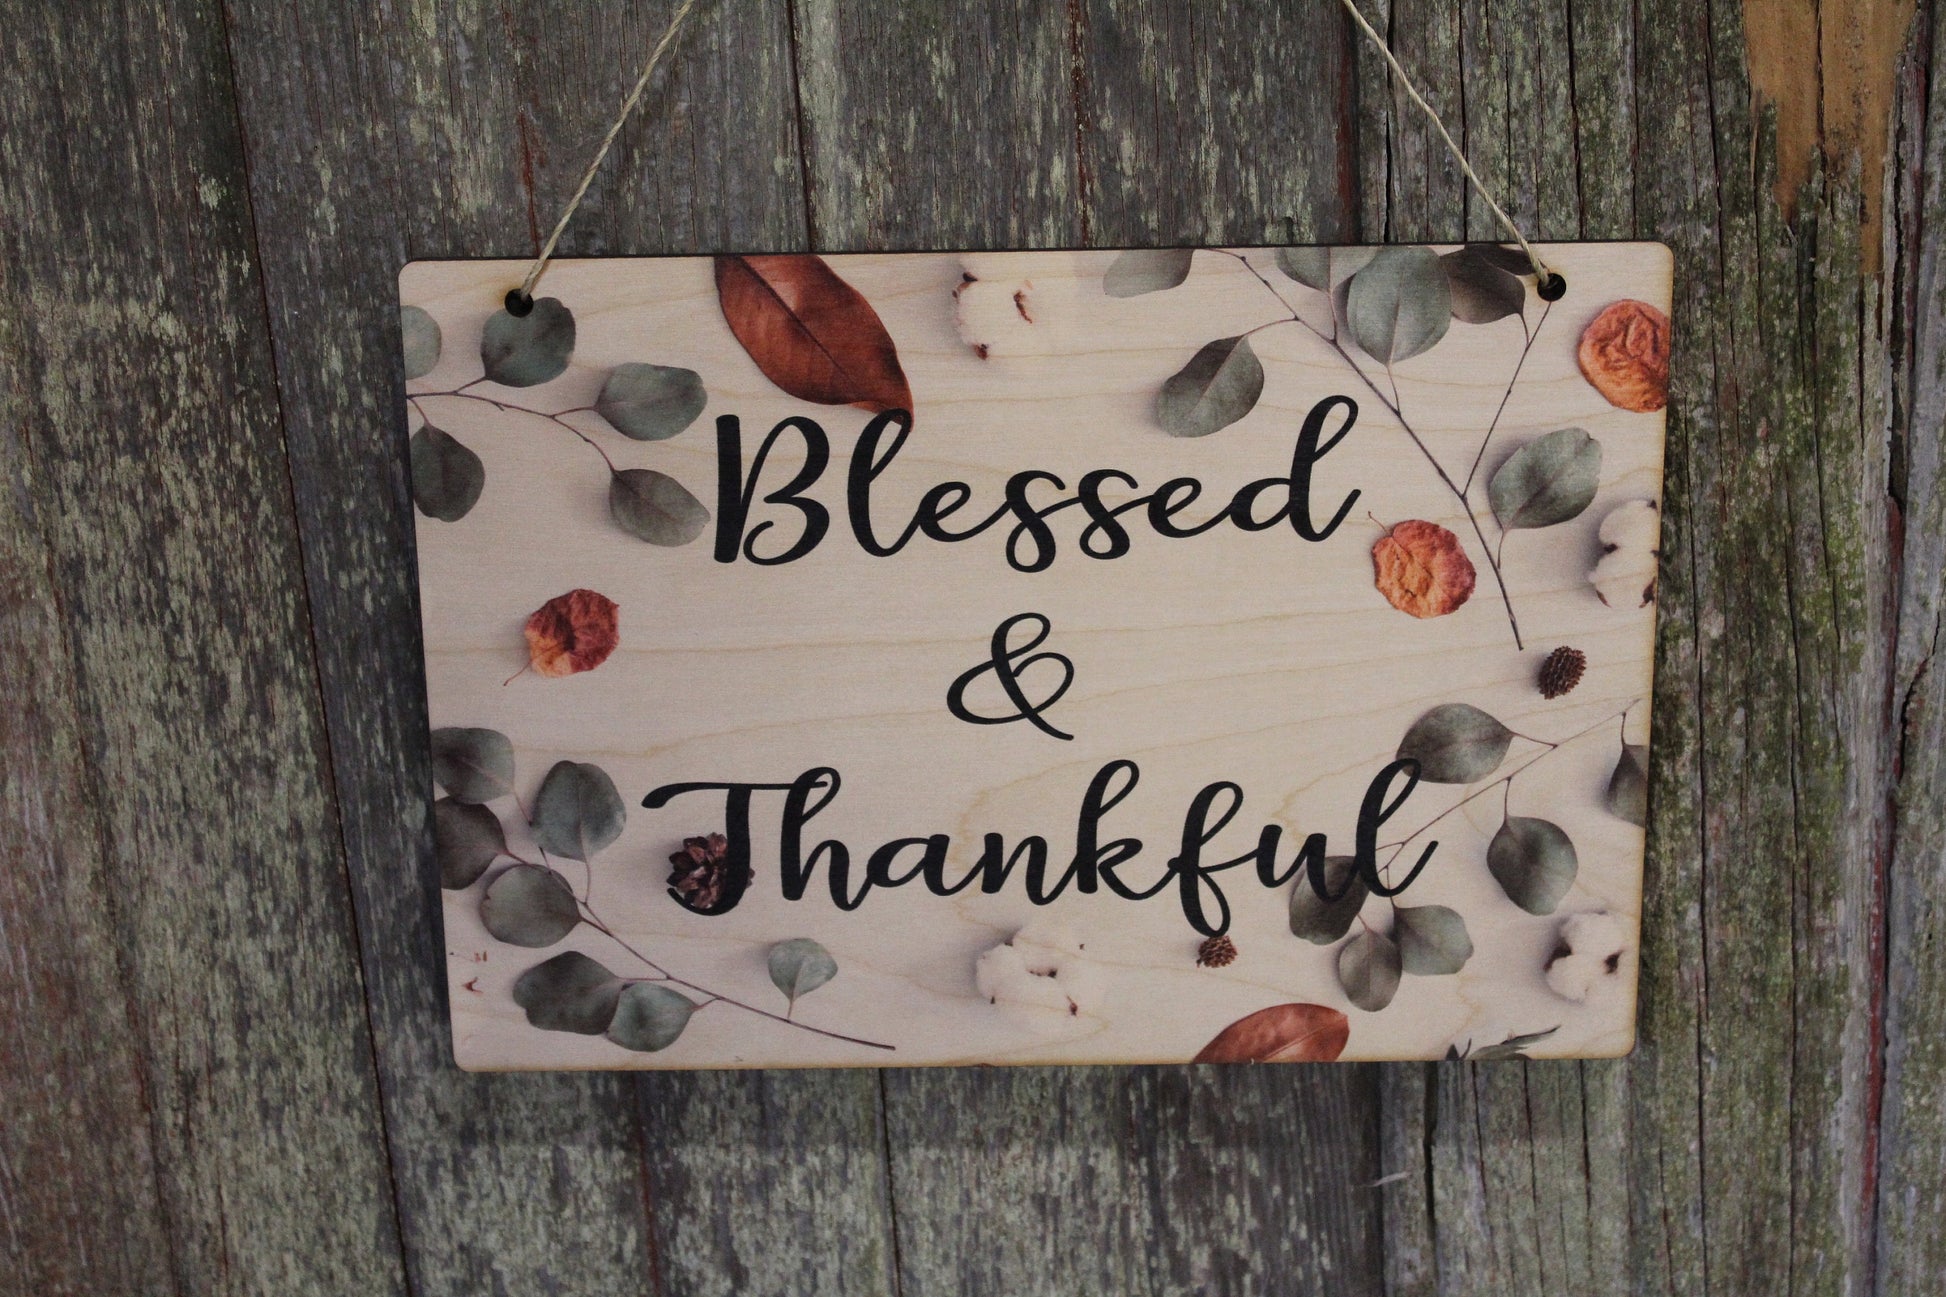 Blessed and Thankful Blessed & Thankful Autumn Leaves Fall Color Rustic Wooden Sign Wall Decor Art Plaque Wood Print